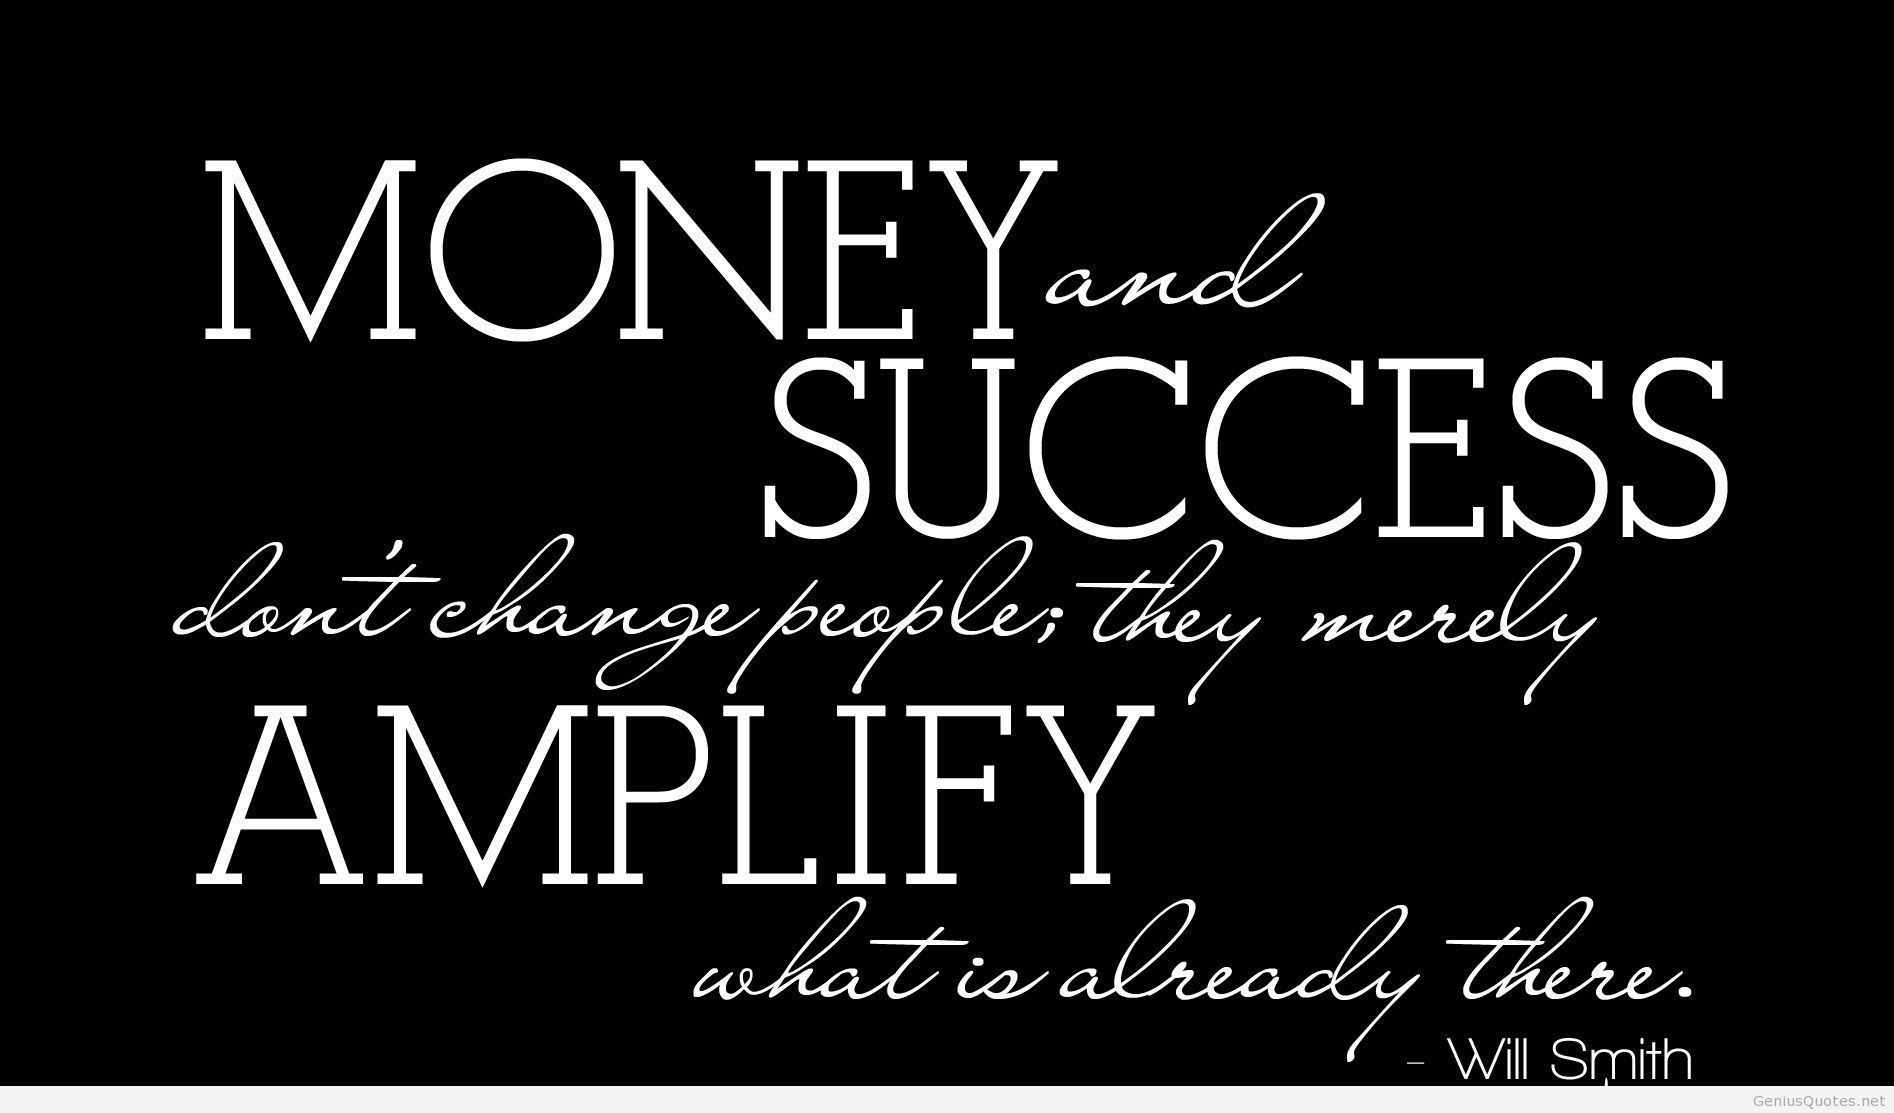 Funny quotes hd wallpaper about money and success